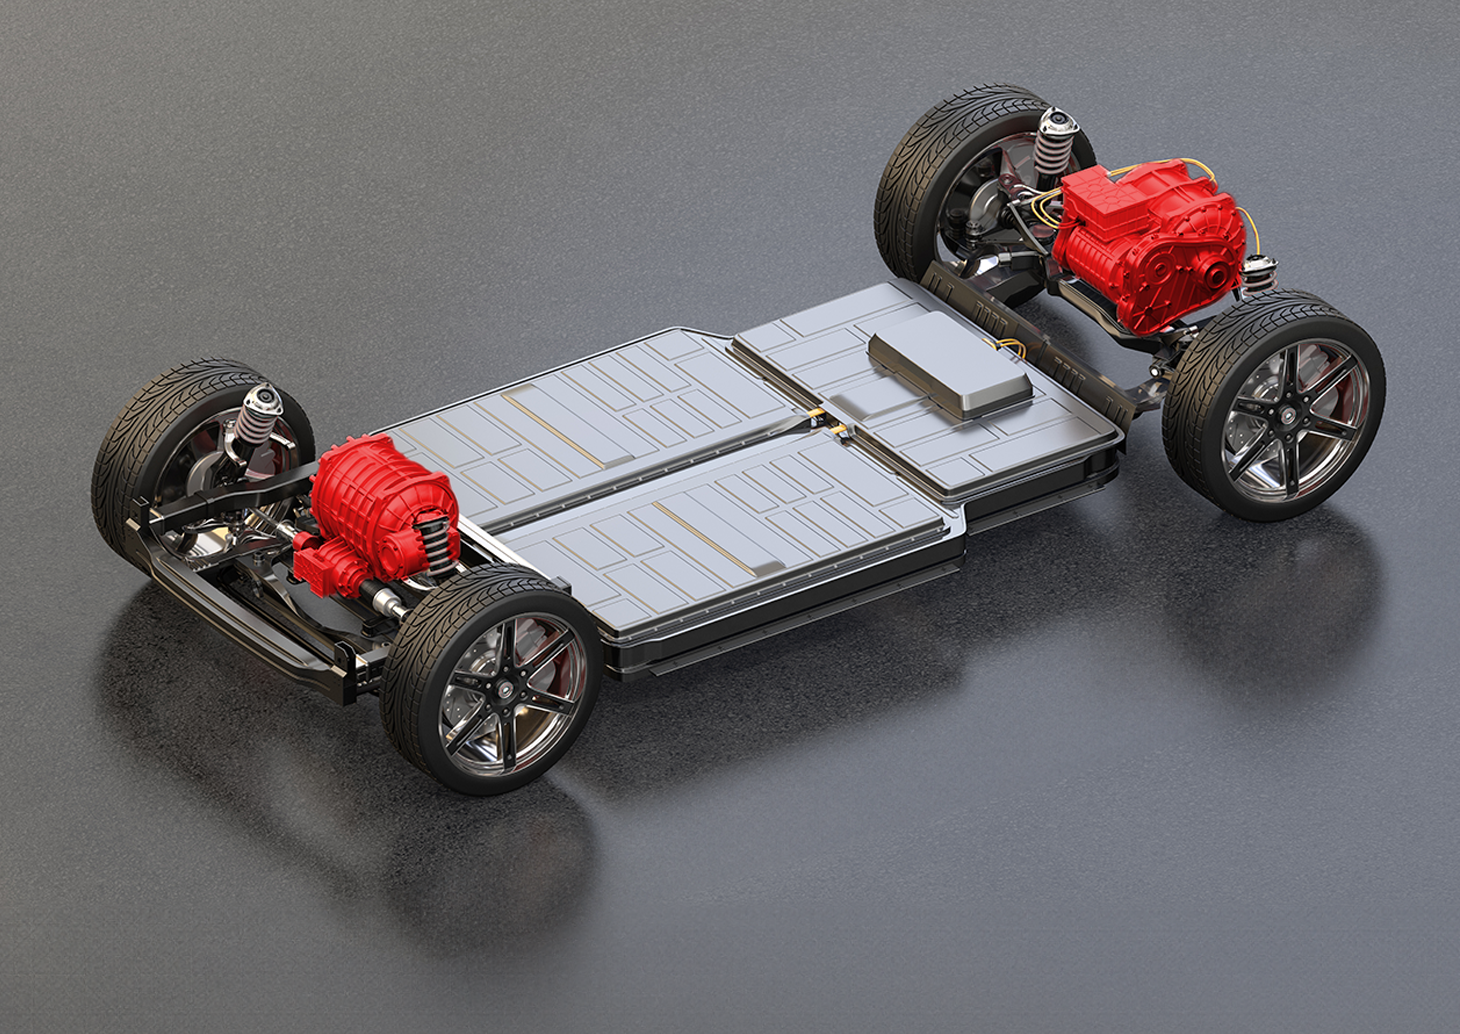 A car model that includes two engines.